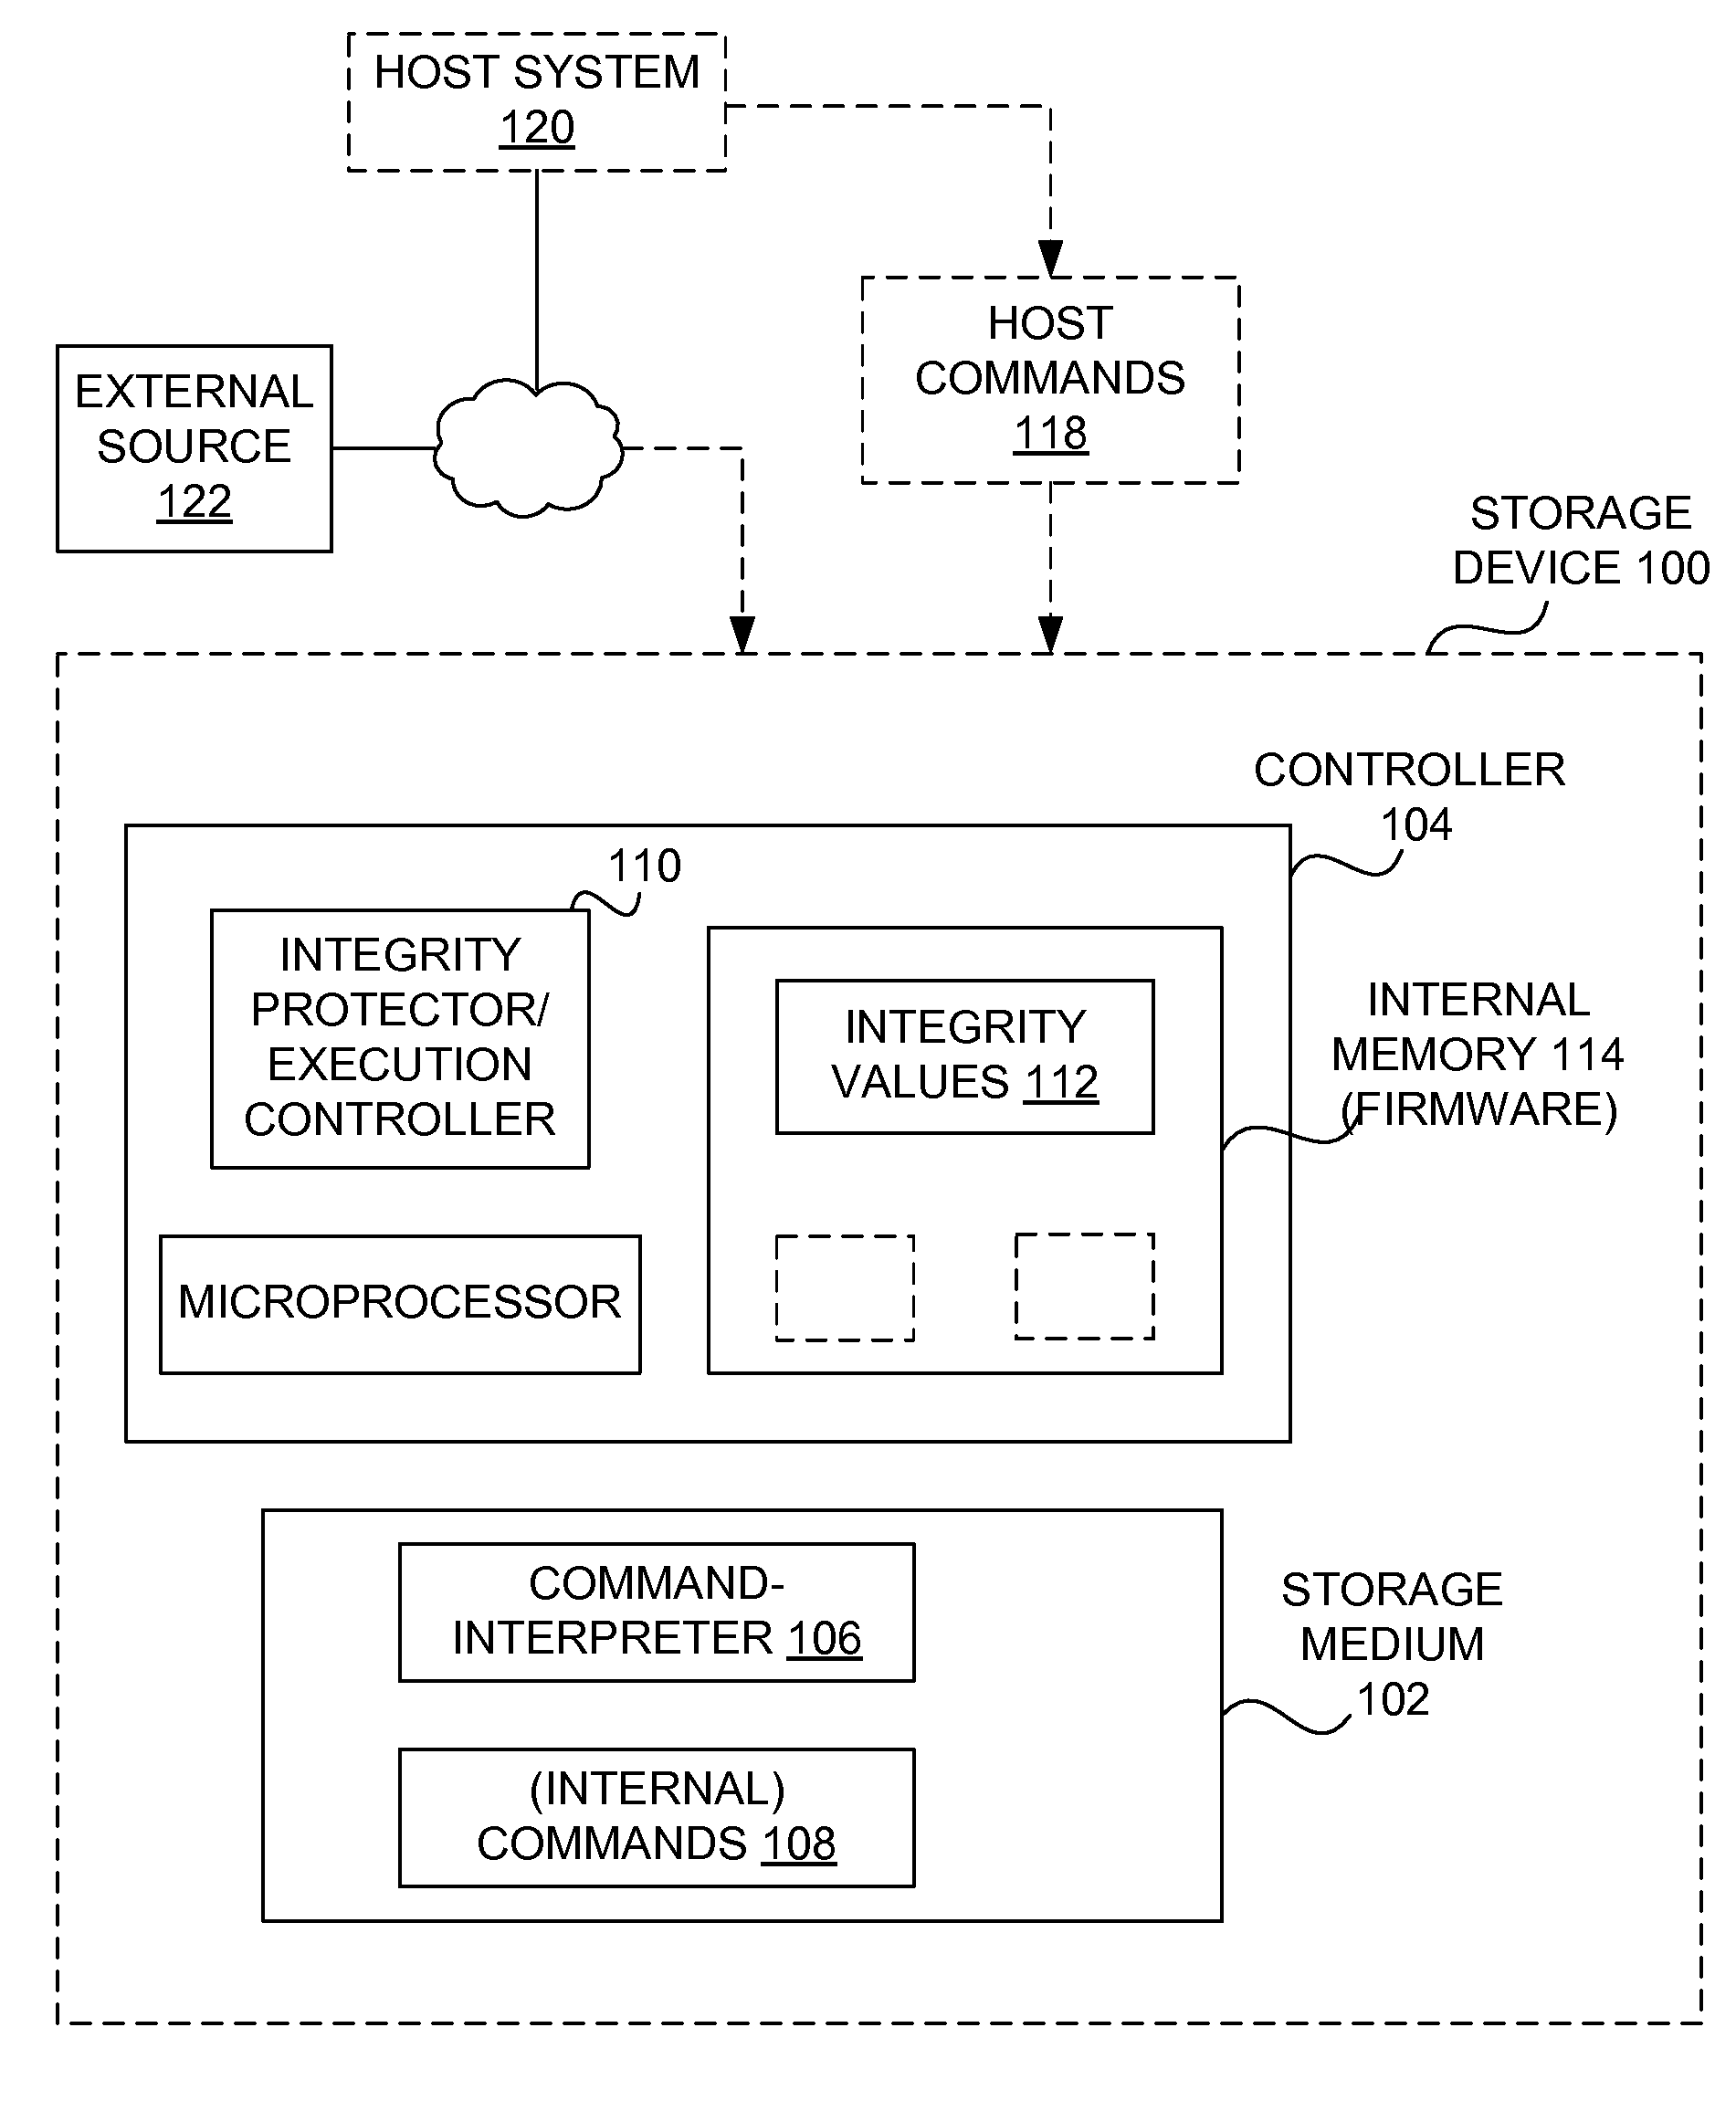 Safe command execution and error recovery for storage devices